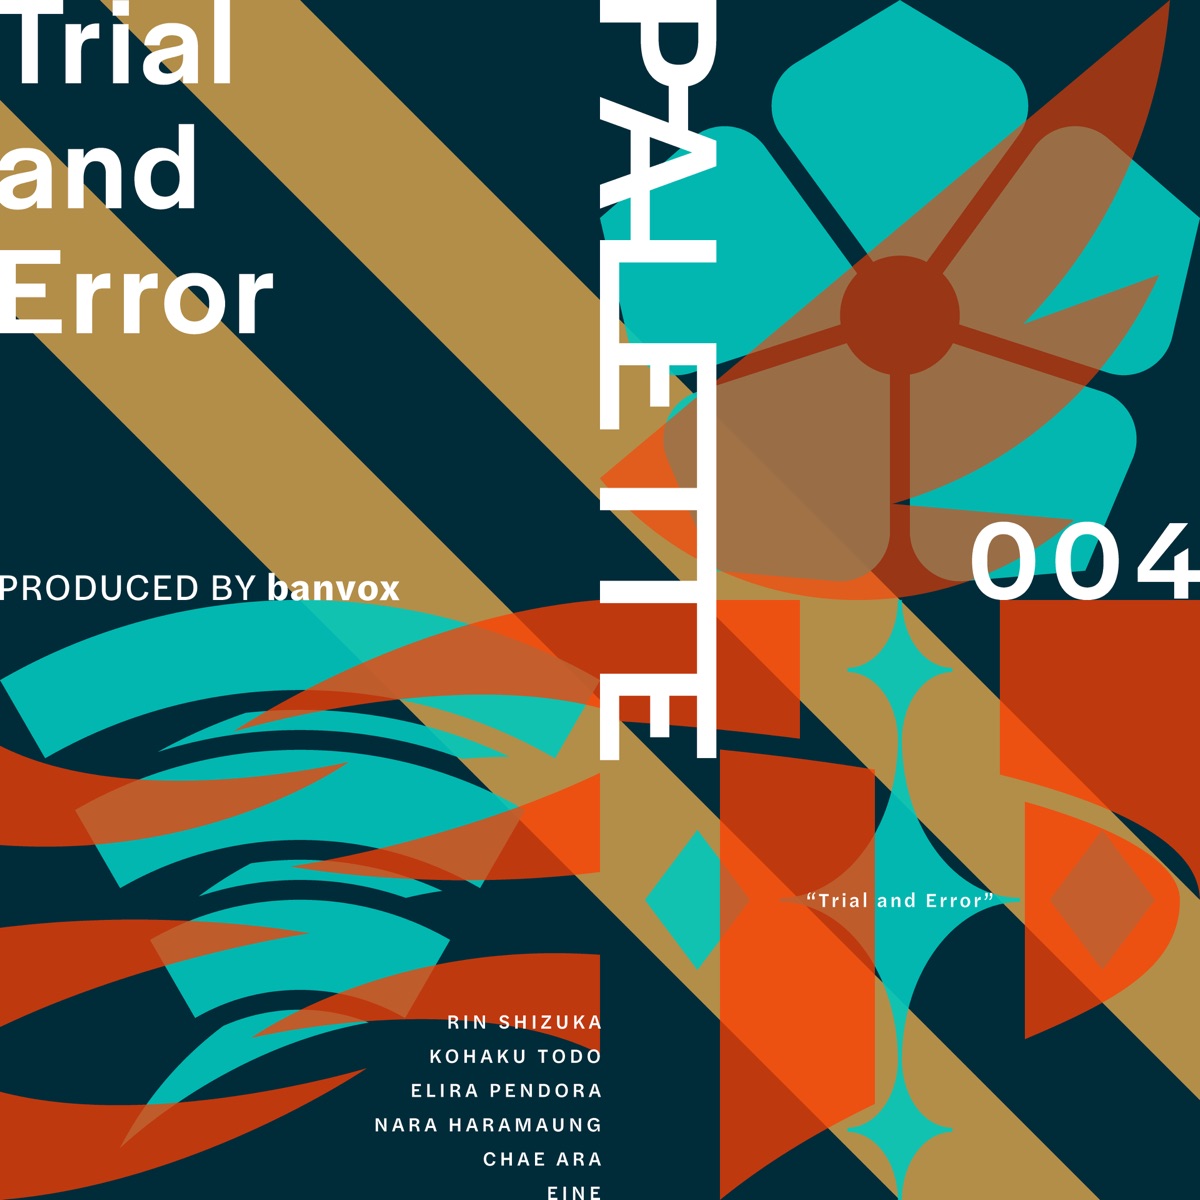 『VirtuaReal - Trial and Error (Chinese Ver.) feat. Eine』収録の『Trial and Error』ジャケット